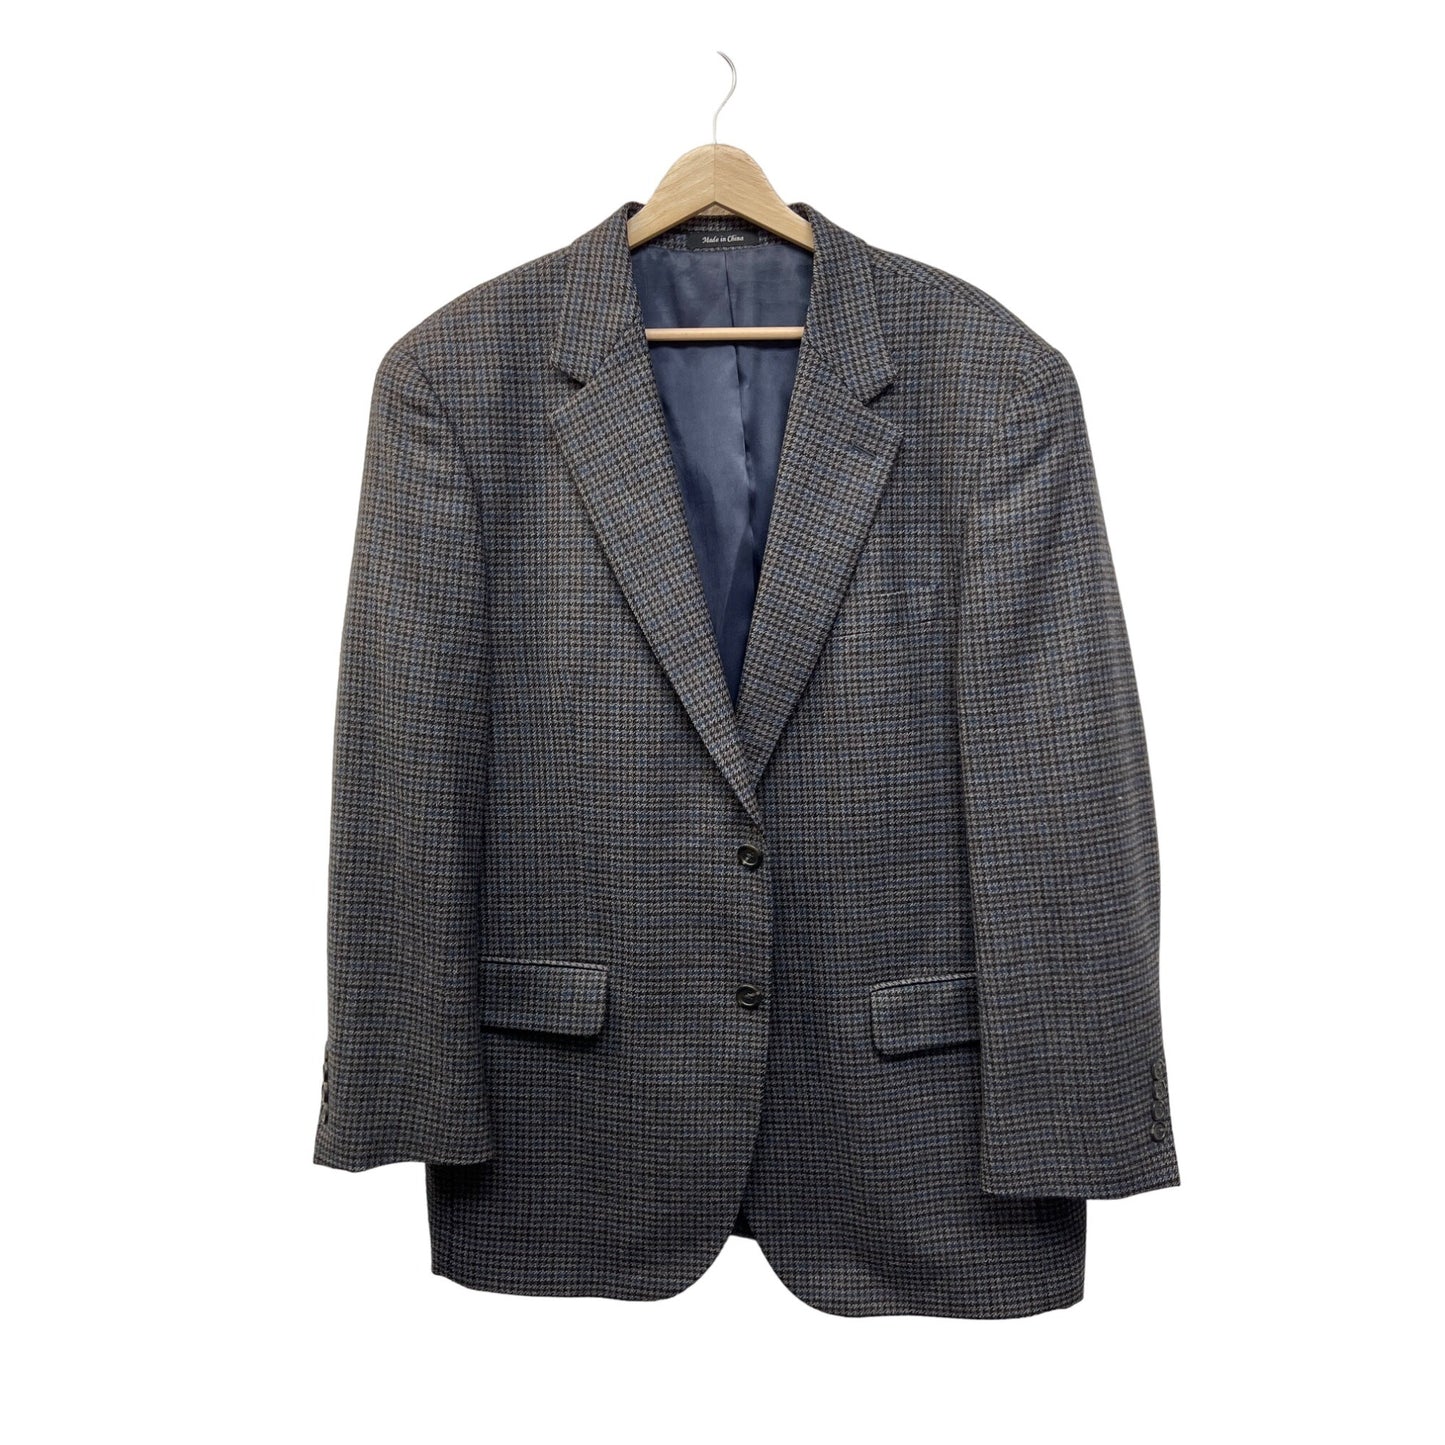 Chaps Gray and Navy Checked Lambswool Blazer